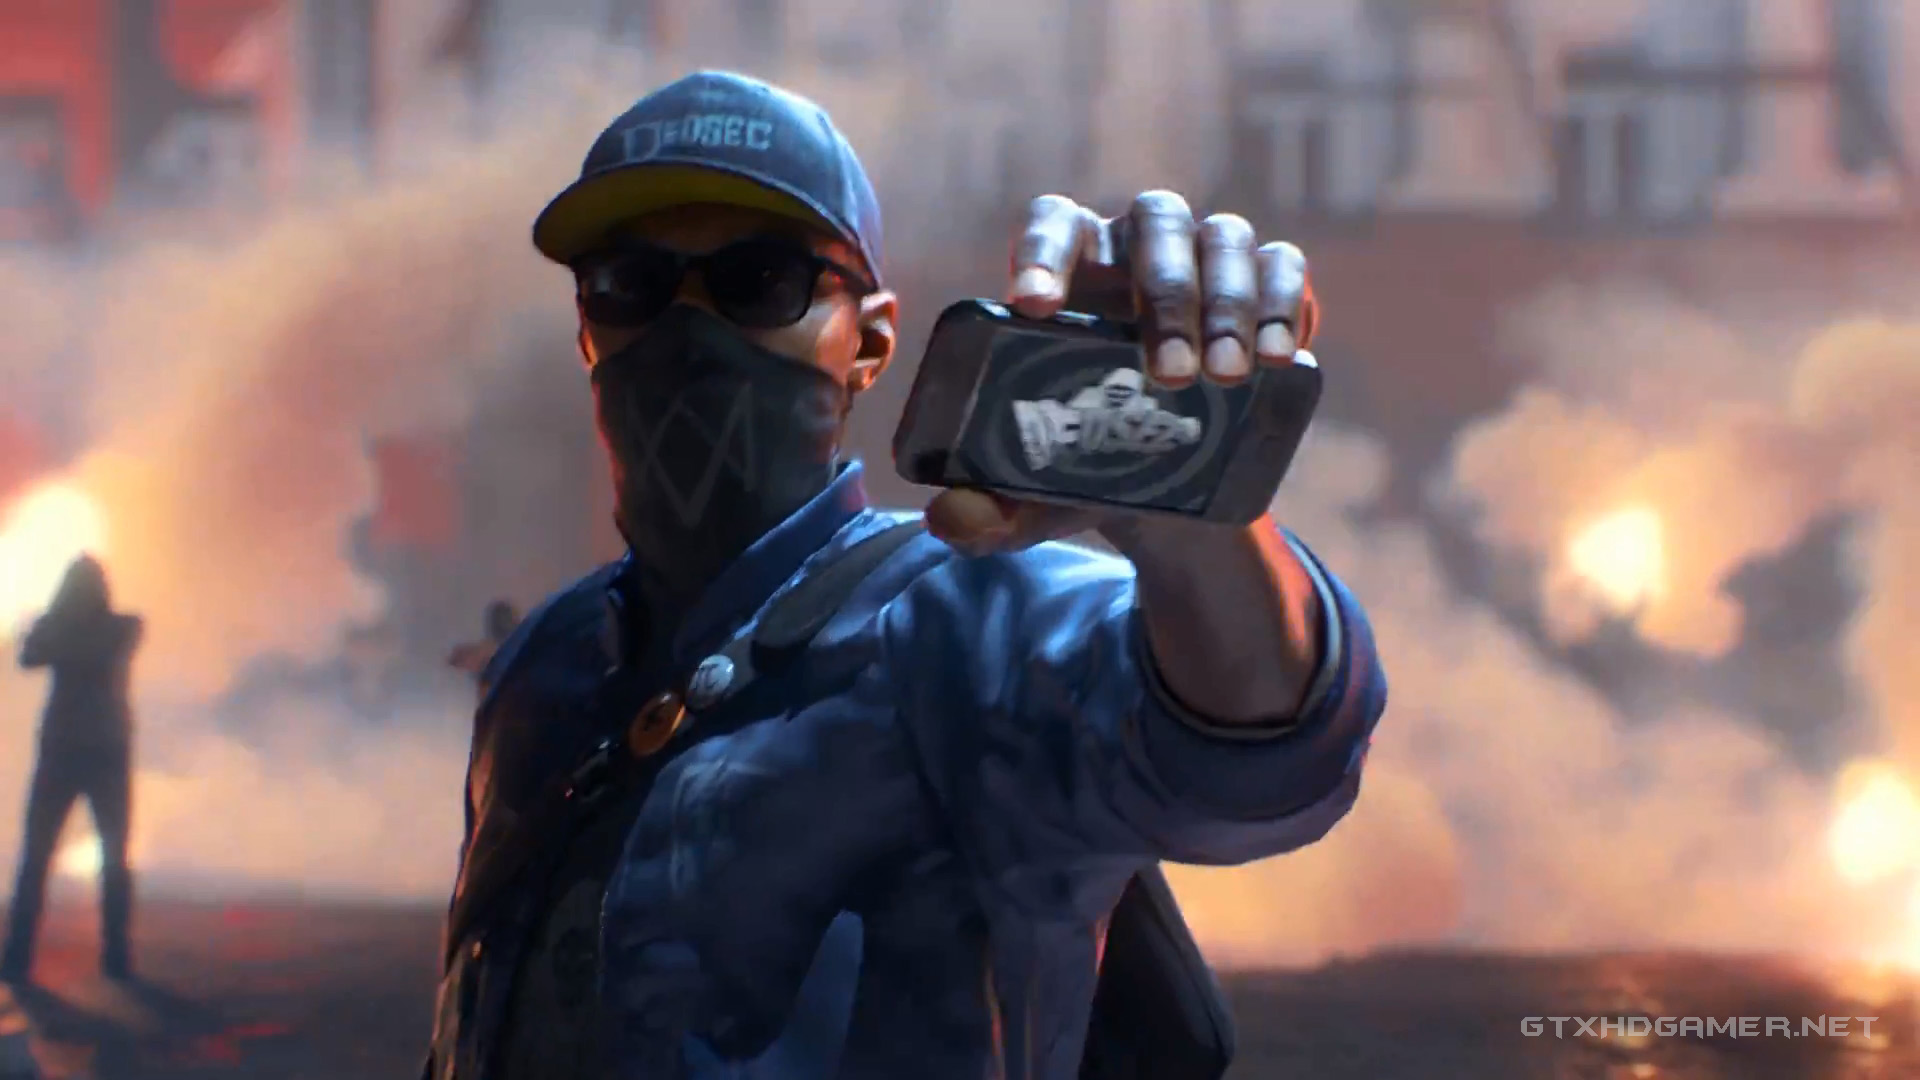 Free Download Watch Dogs 2 Hd Wallpapers And Background Images Stmednet 19x1080 For Your Desktop Mobile Tablet Explore 32 Watchdog 2 Wallpapers Watchdog 2 Wallpapers Prototype 2 Wallpaper Dota 2 Wallpapers